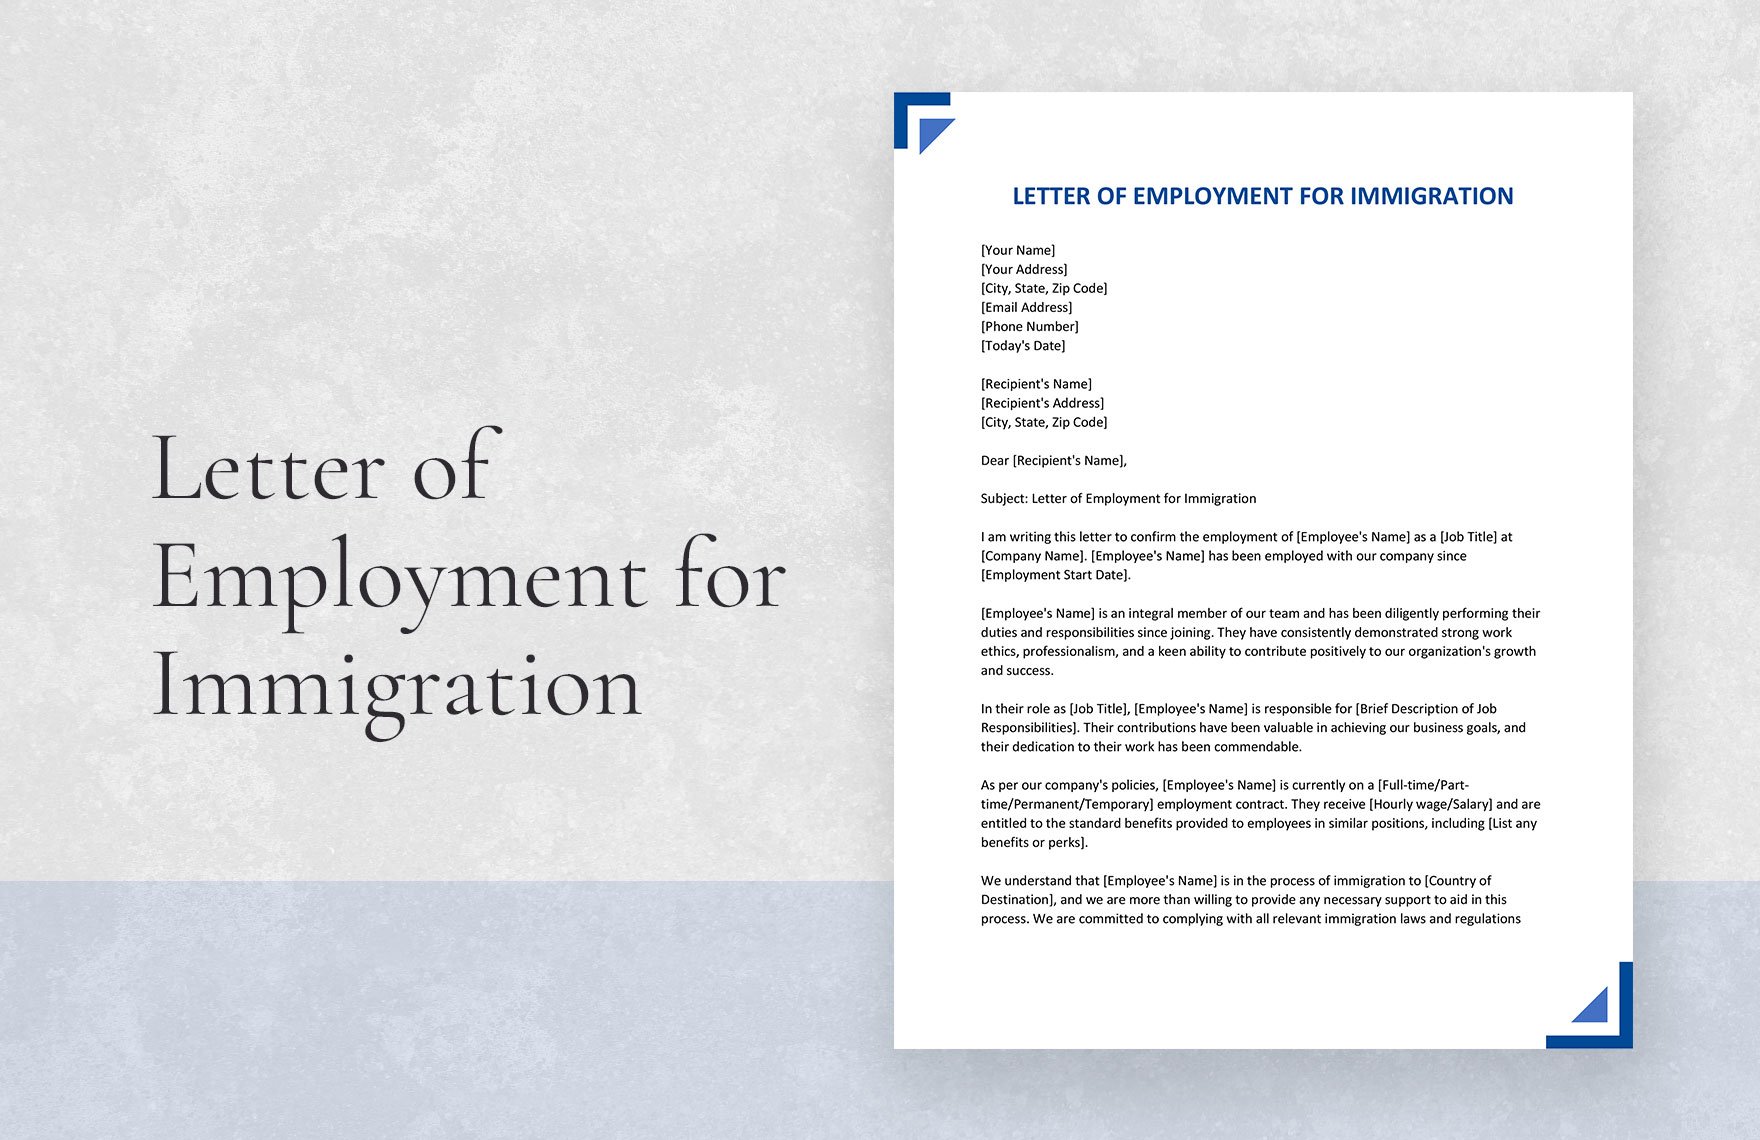 Letter of Employment for Immigration